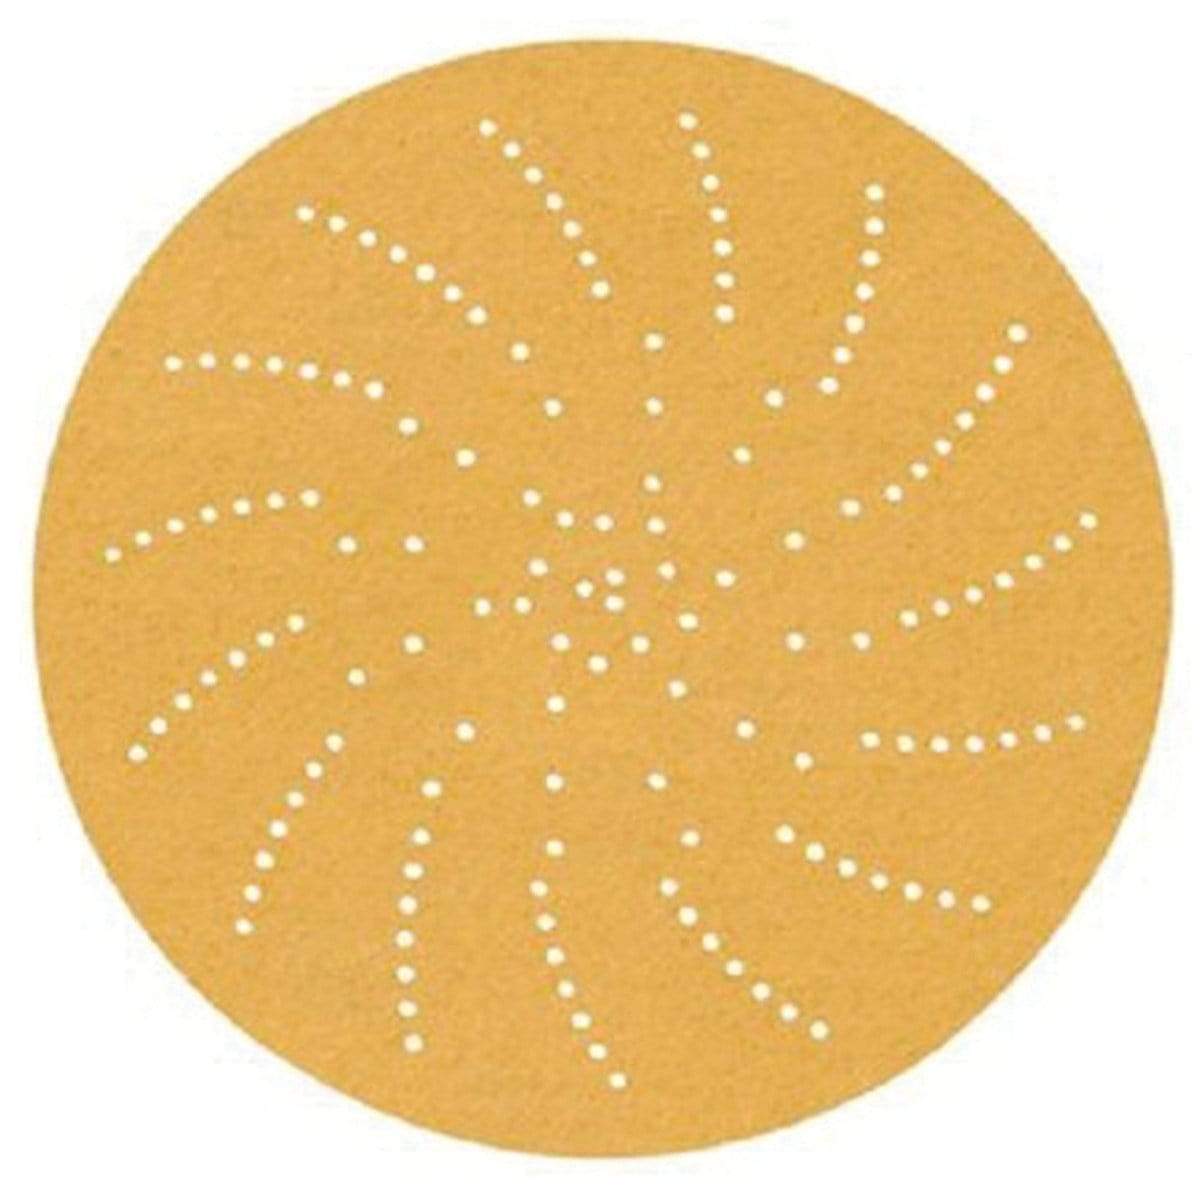 3M Marine Qualifies for Free Shipping 3M Clean Sanding Disc 6" P120 Grit 50 Per Box #55508